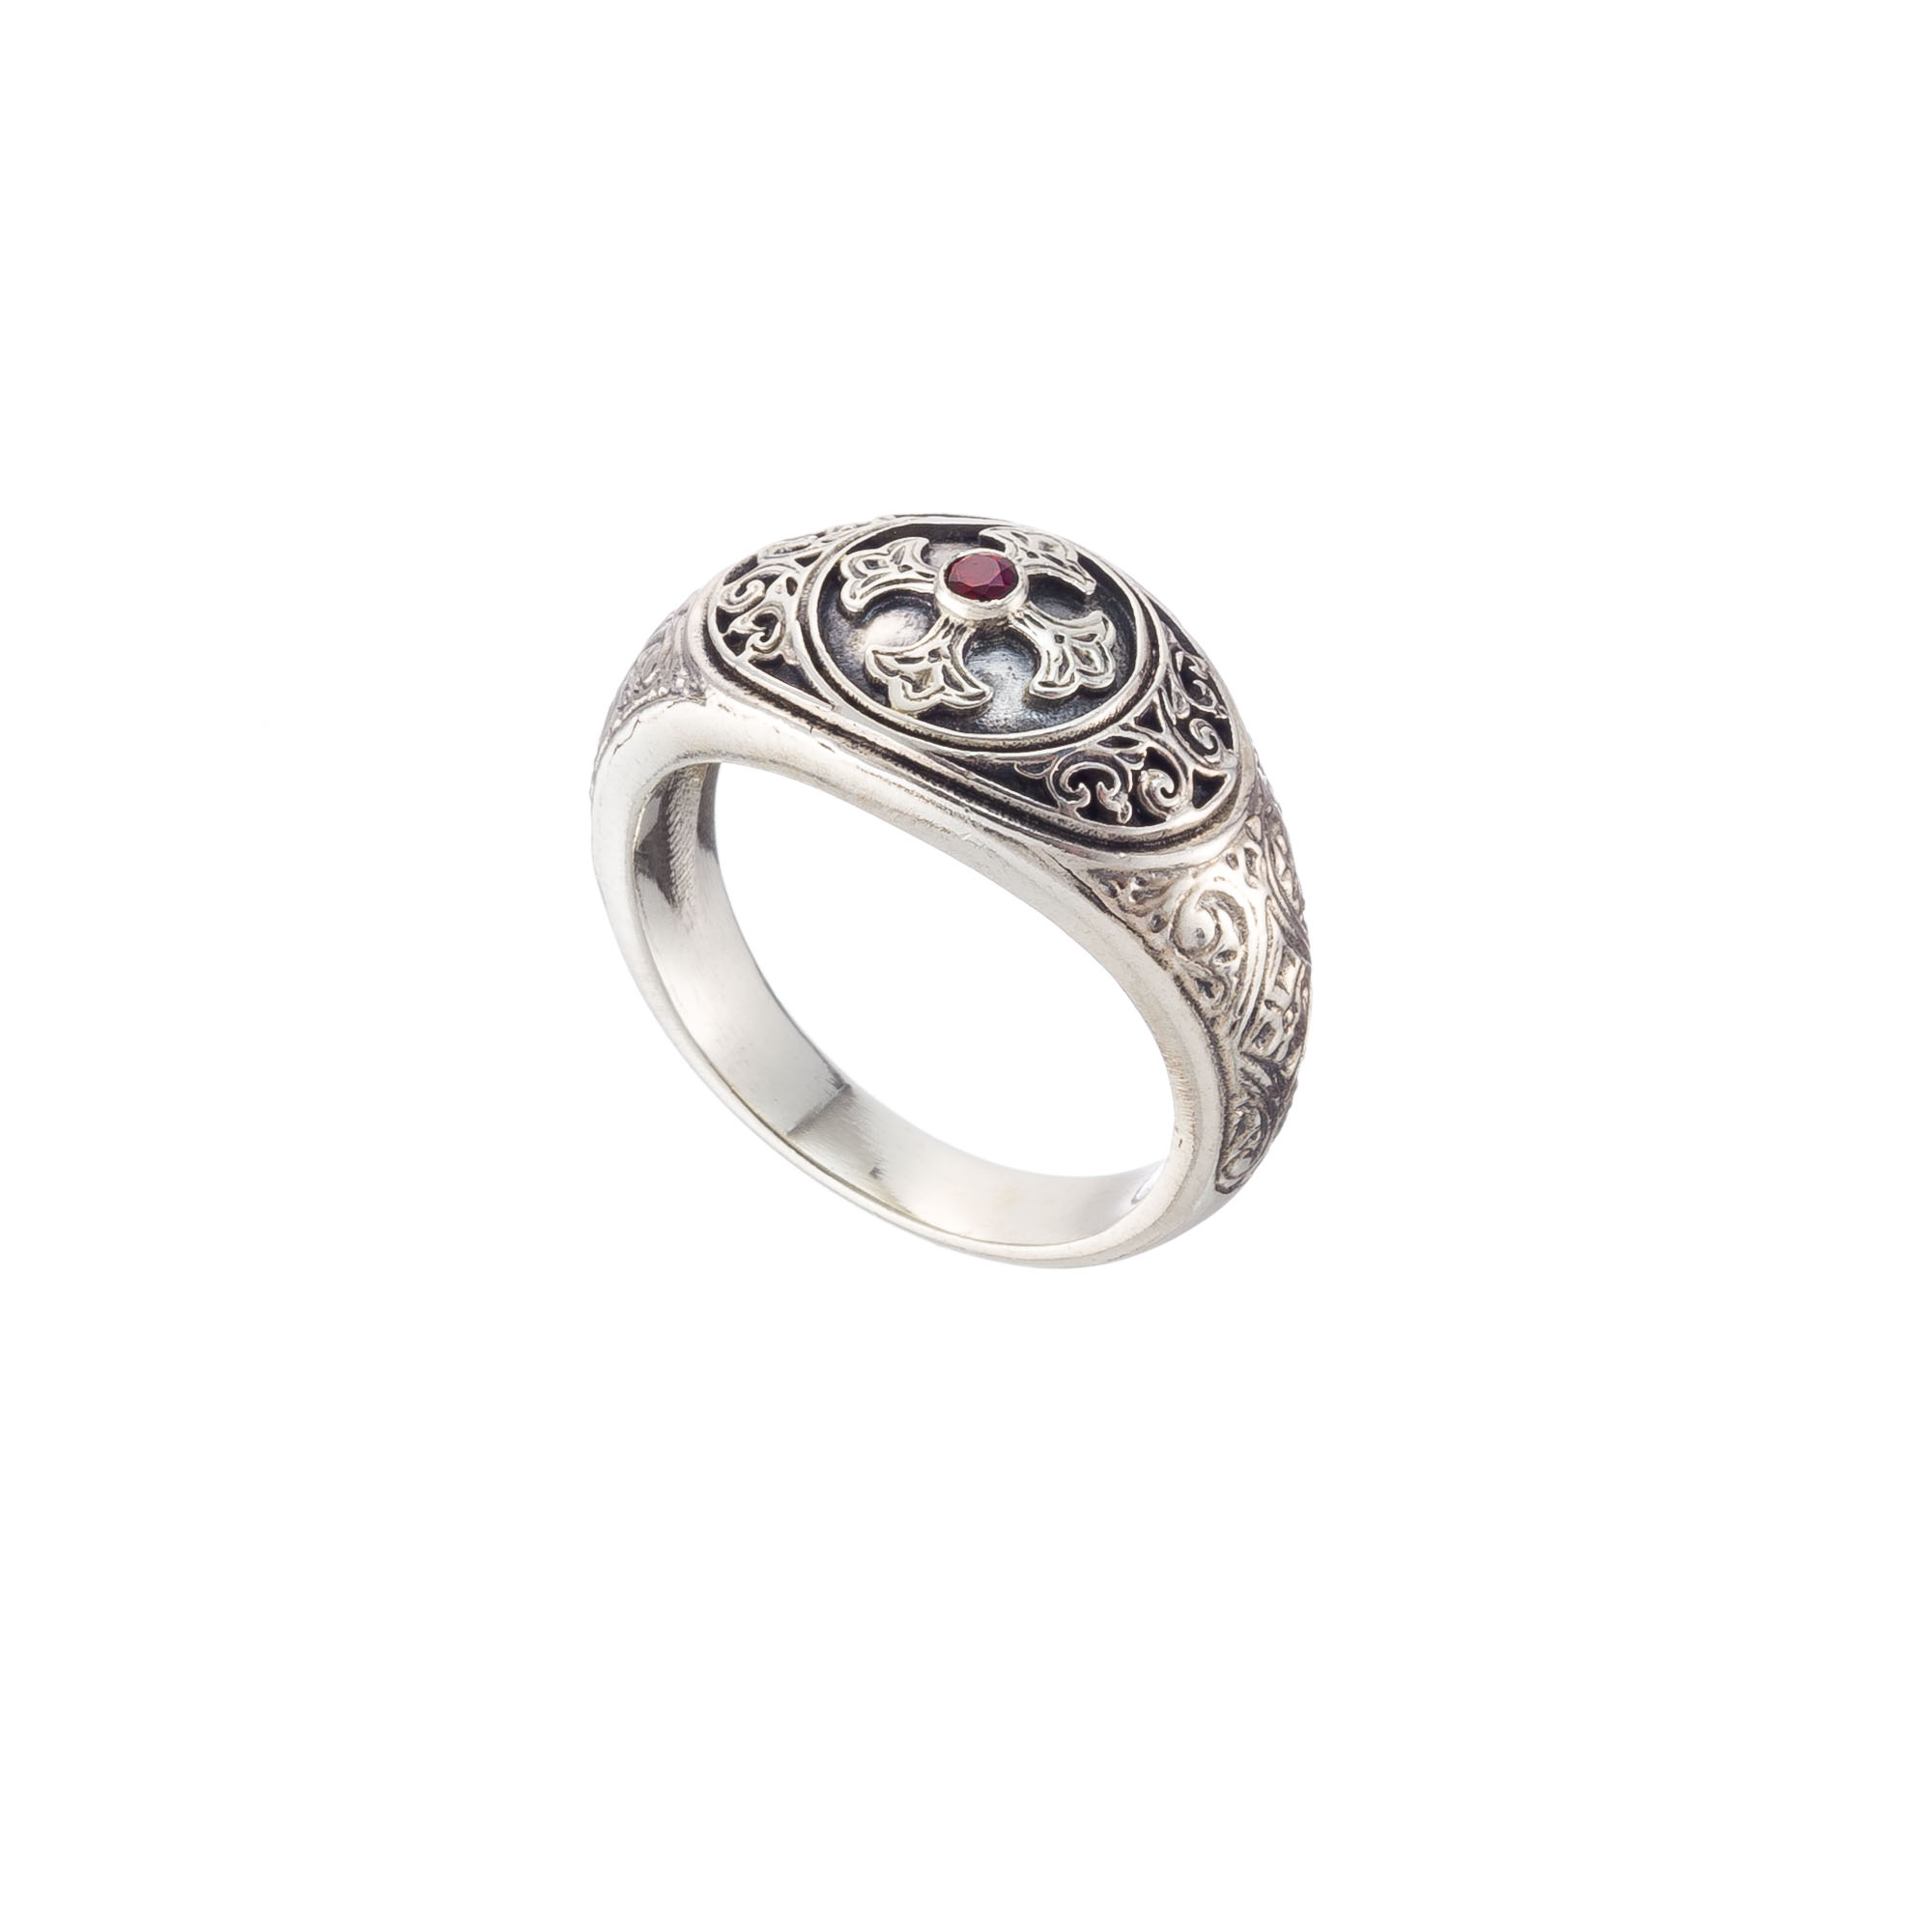 Symbol Ring in sterling silver with garnet